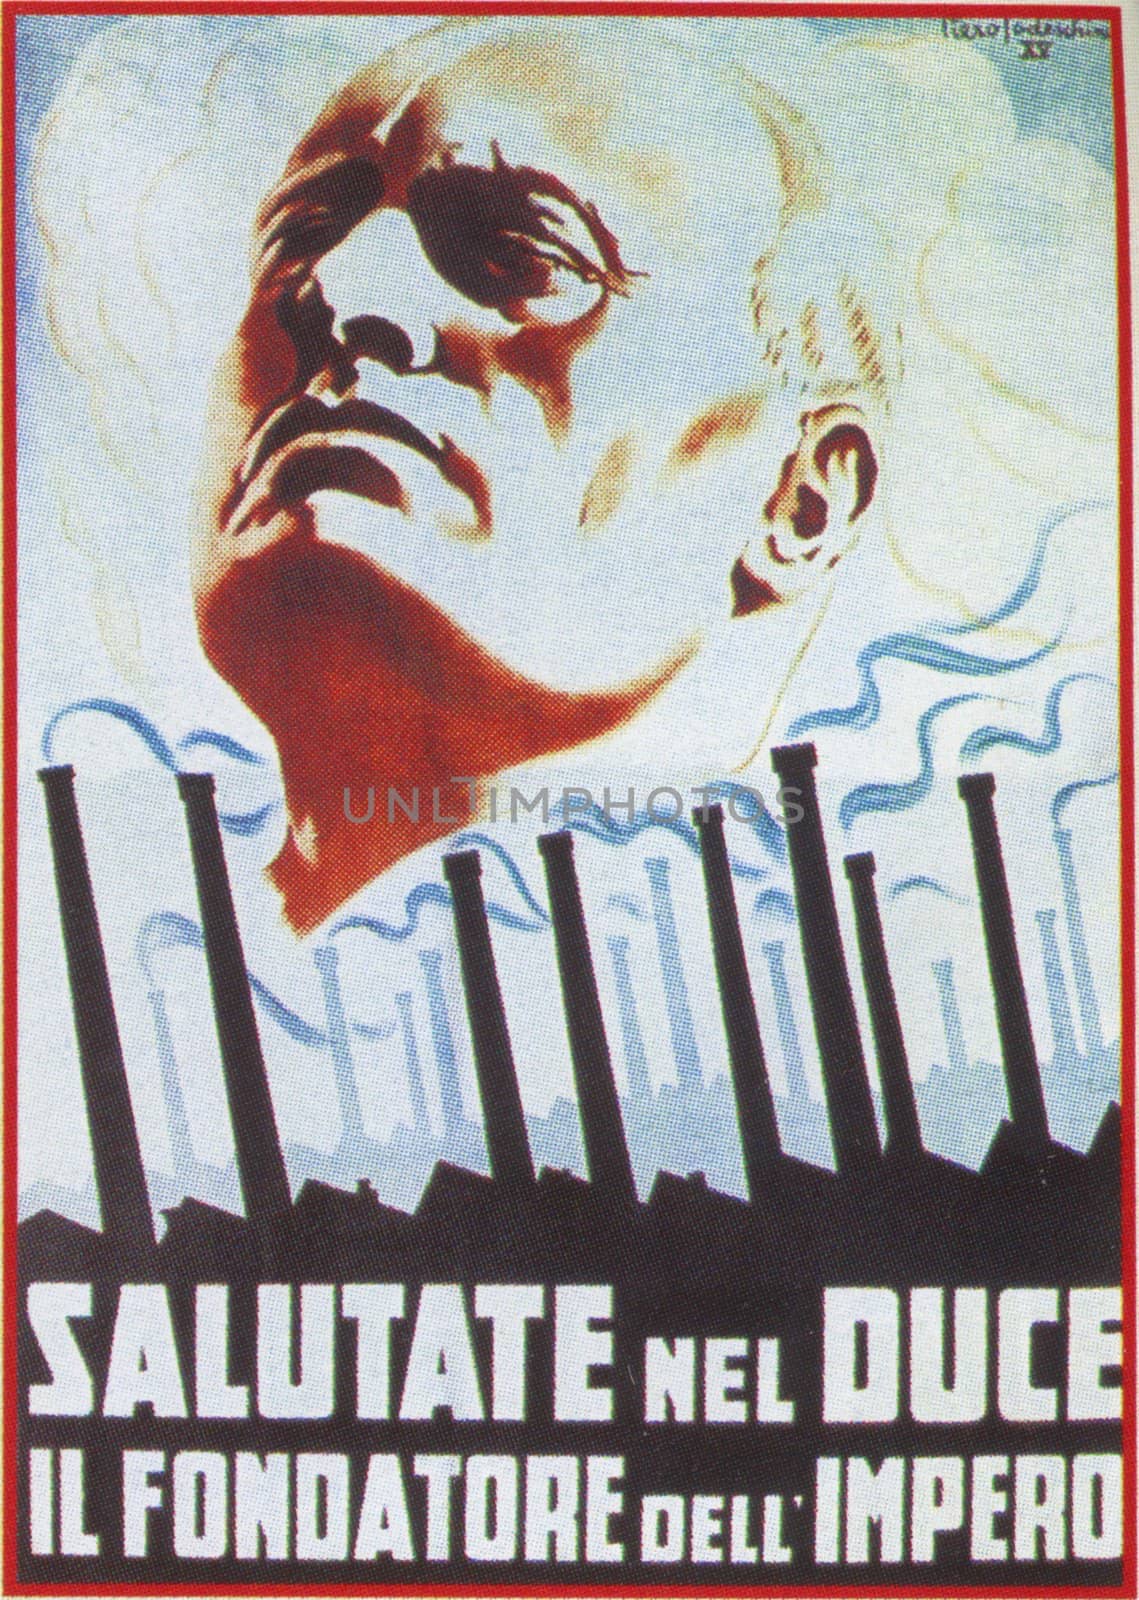 Benito Mussolini shown on Nazi poster by andromeda13